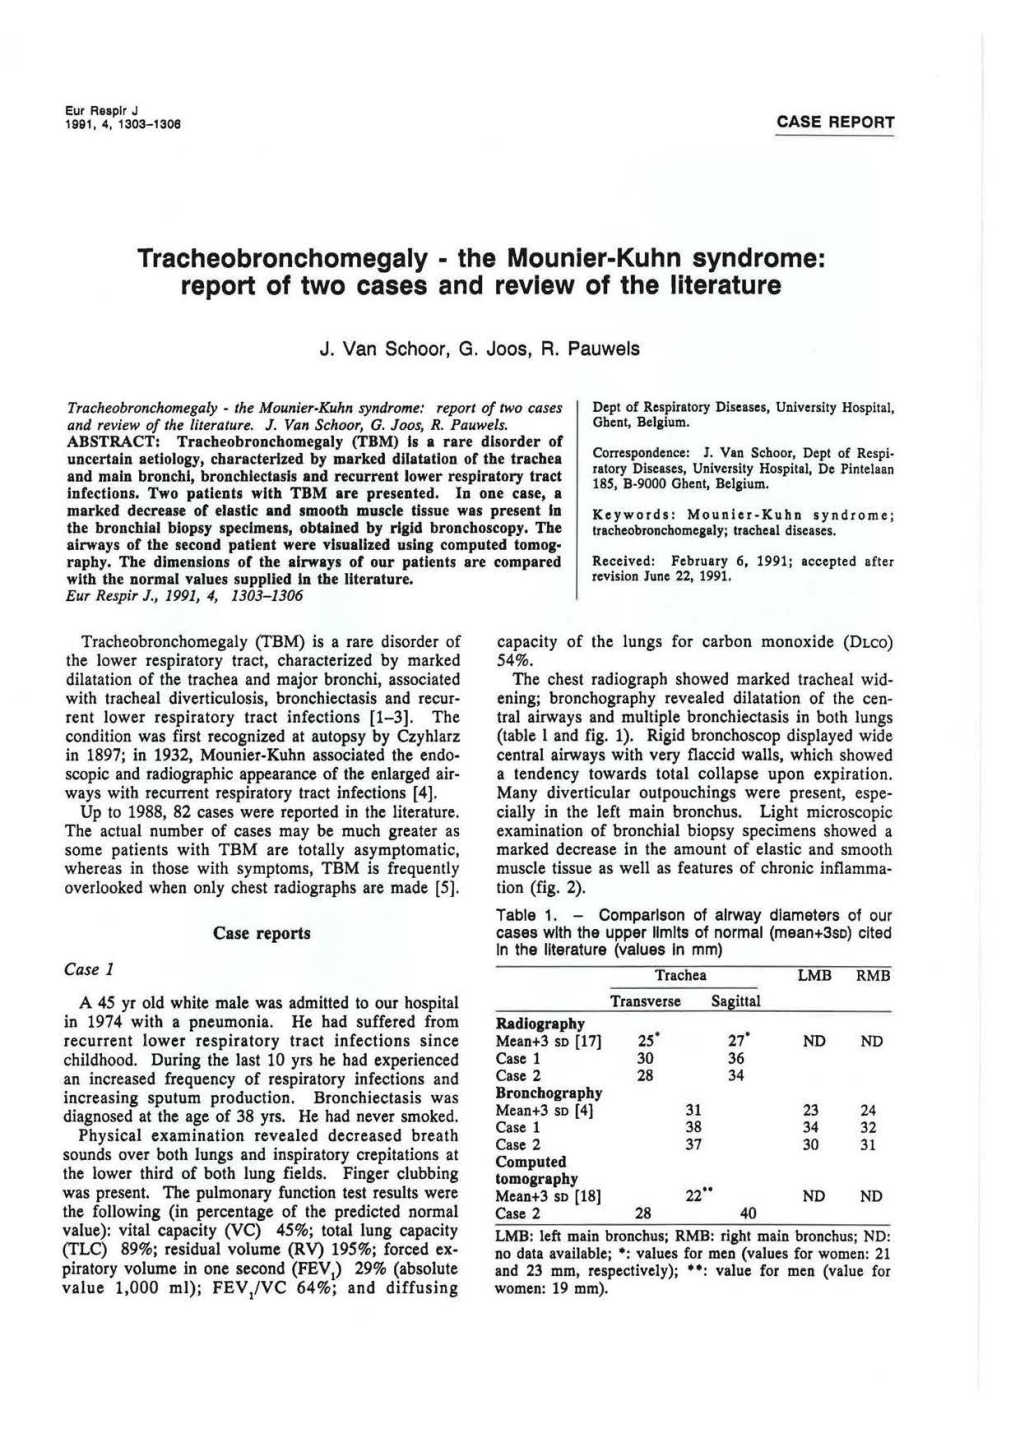 Tracheobronchomegaly- the Mounier-Kuhn Syndrome: Report of Two Cases and Review of the Literature